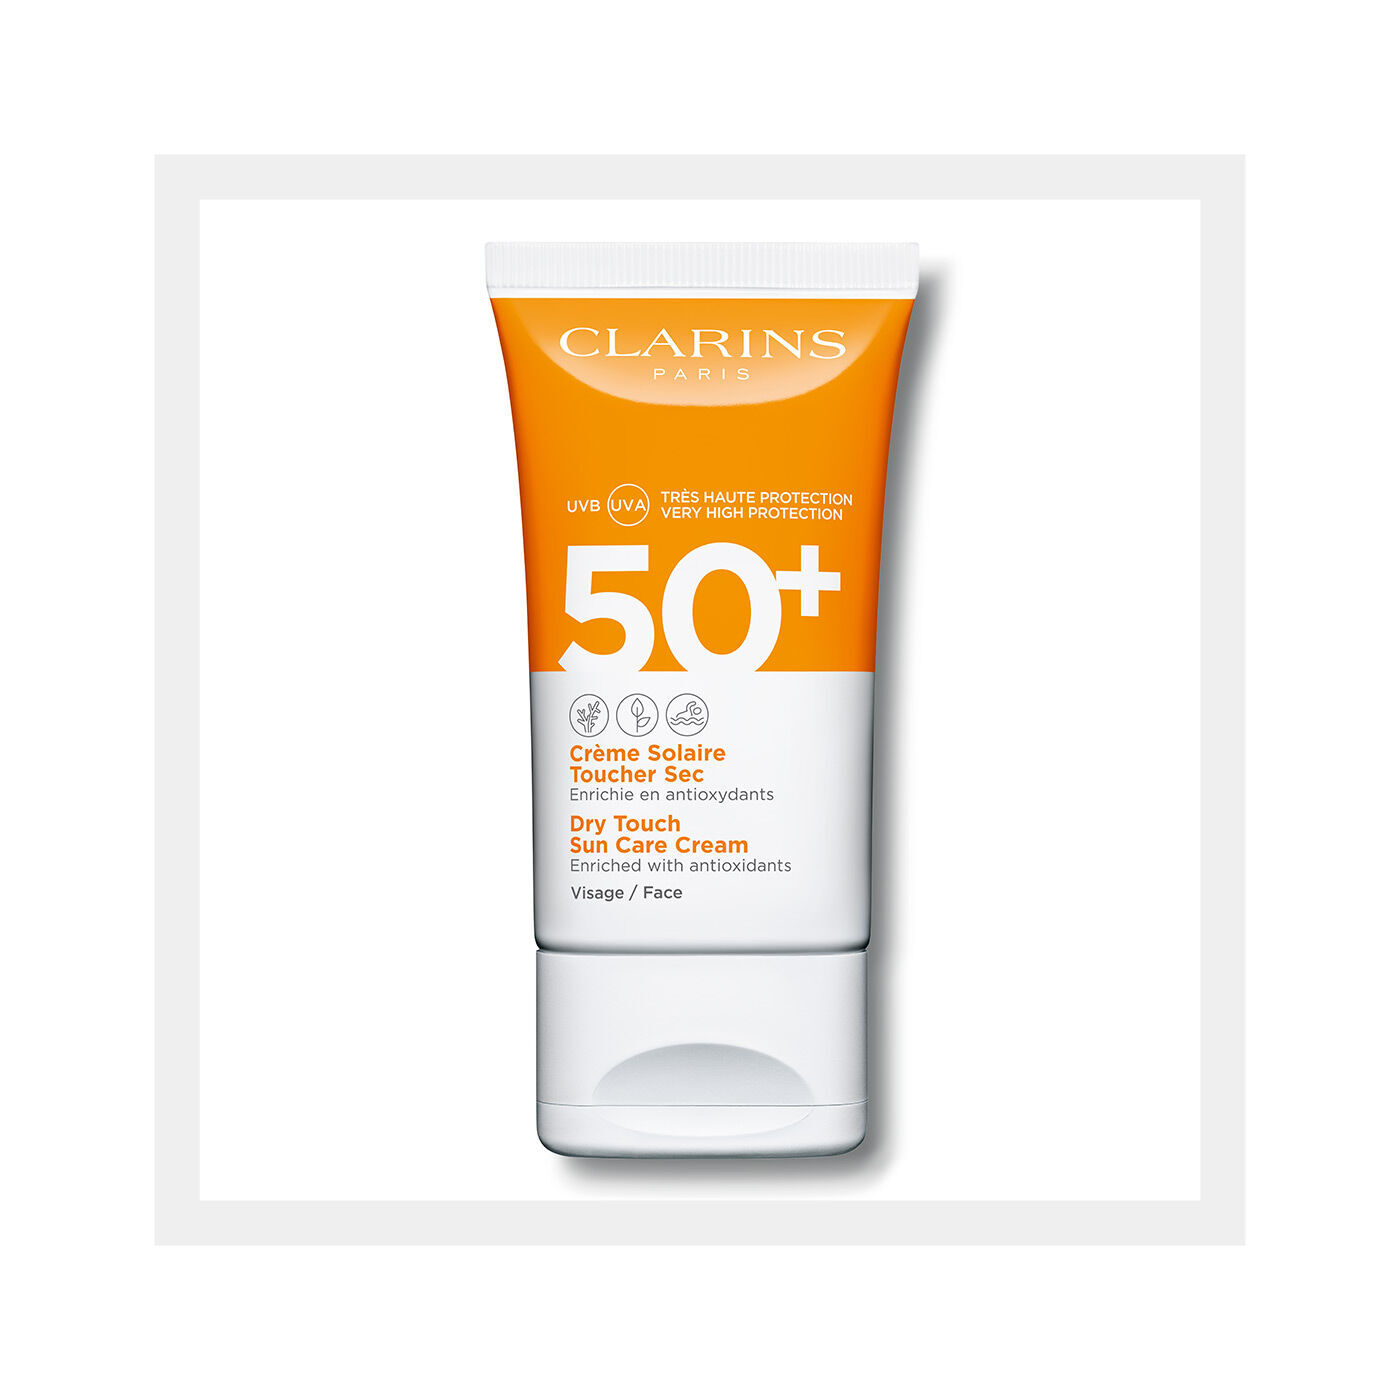 Clarins Dry Touch Sun Care 50+